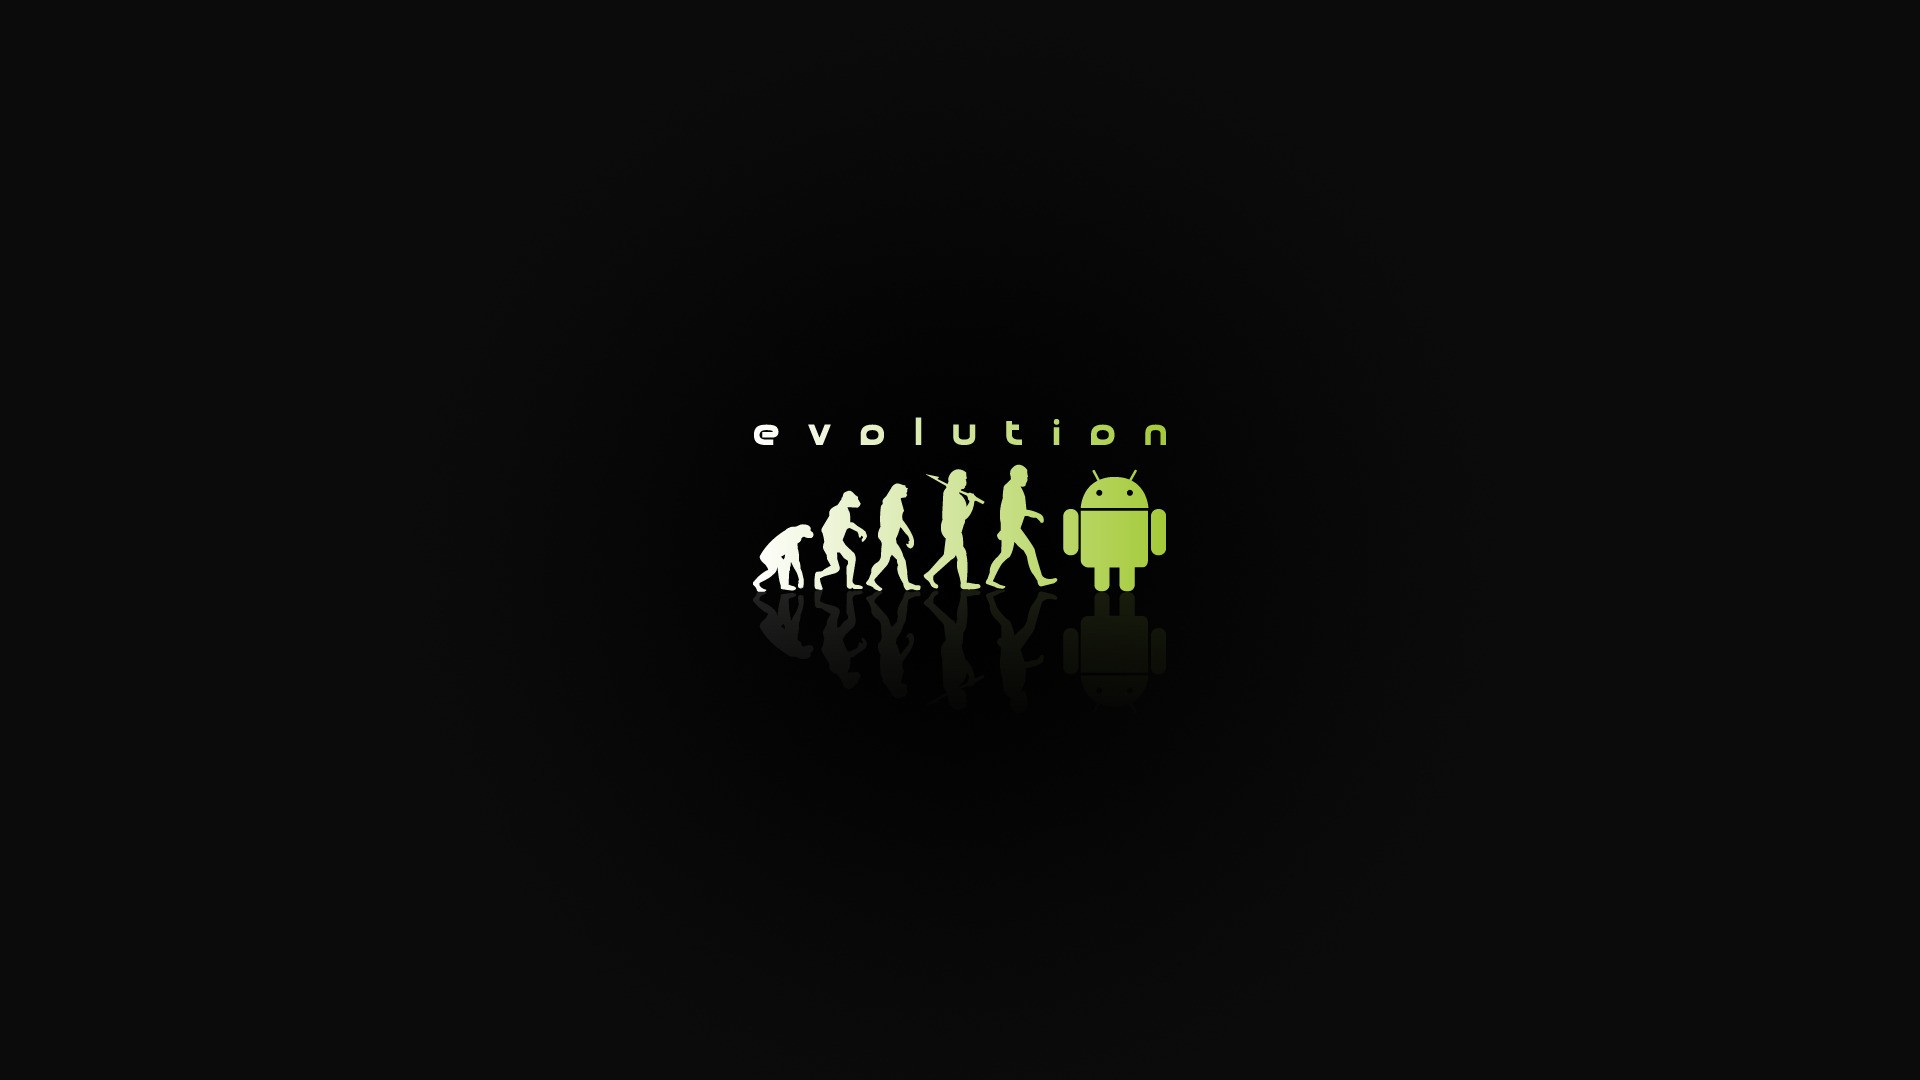 General 1920x1080 humor evolution minimalism Android Marshmallow simple background Android (operating system) black background